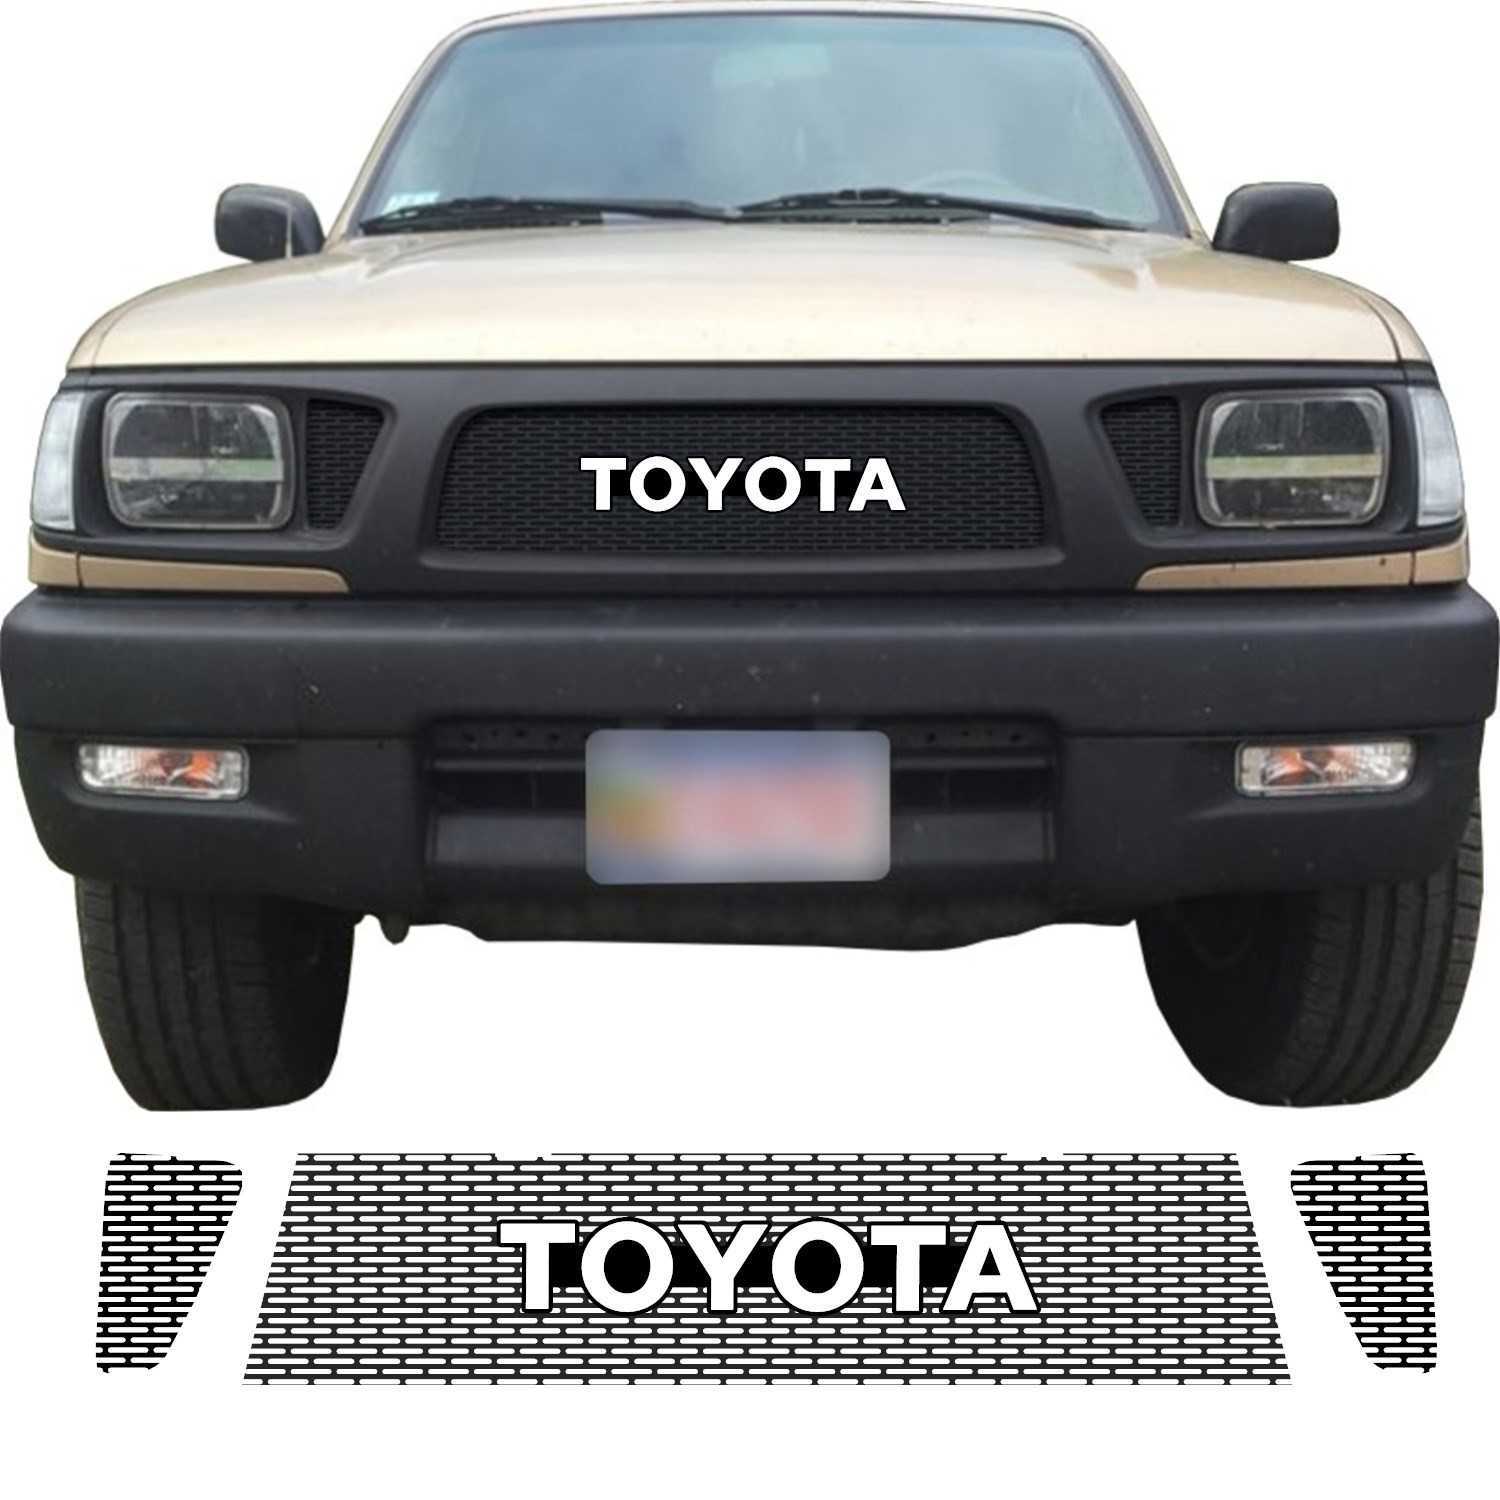 1995 - 1997 Toyota Tacoma Grill Mesh With Toyota Emblem